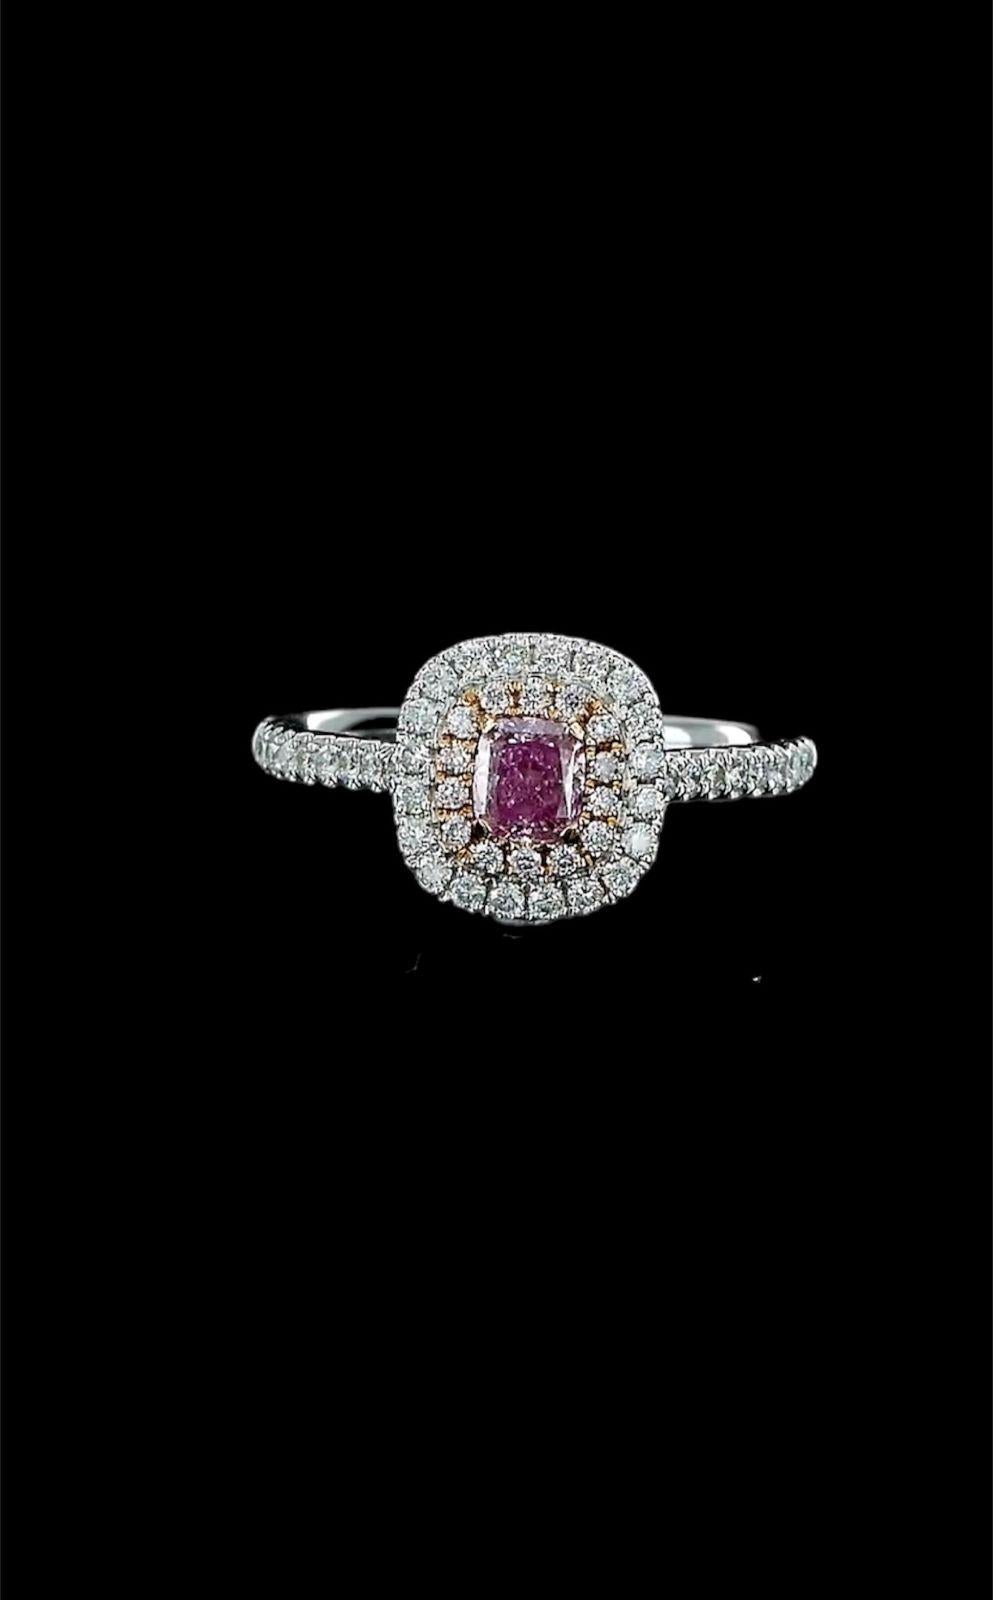 **100% NATURAL FANCY COLOUR DIAMOND JEWELRY**

✪ Jewelry Details ✪

♦ MAIN STONE DETAILS

➛ Stone Shape: Cushion
➛ Stone Color: Faint pink
➛ Stone Clarity: SI2
➛ Stone Weight: 0.33 carats
➛ GIA certified

♦ SIDE STONE DETAILS

➛ Side white diamonds